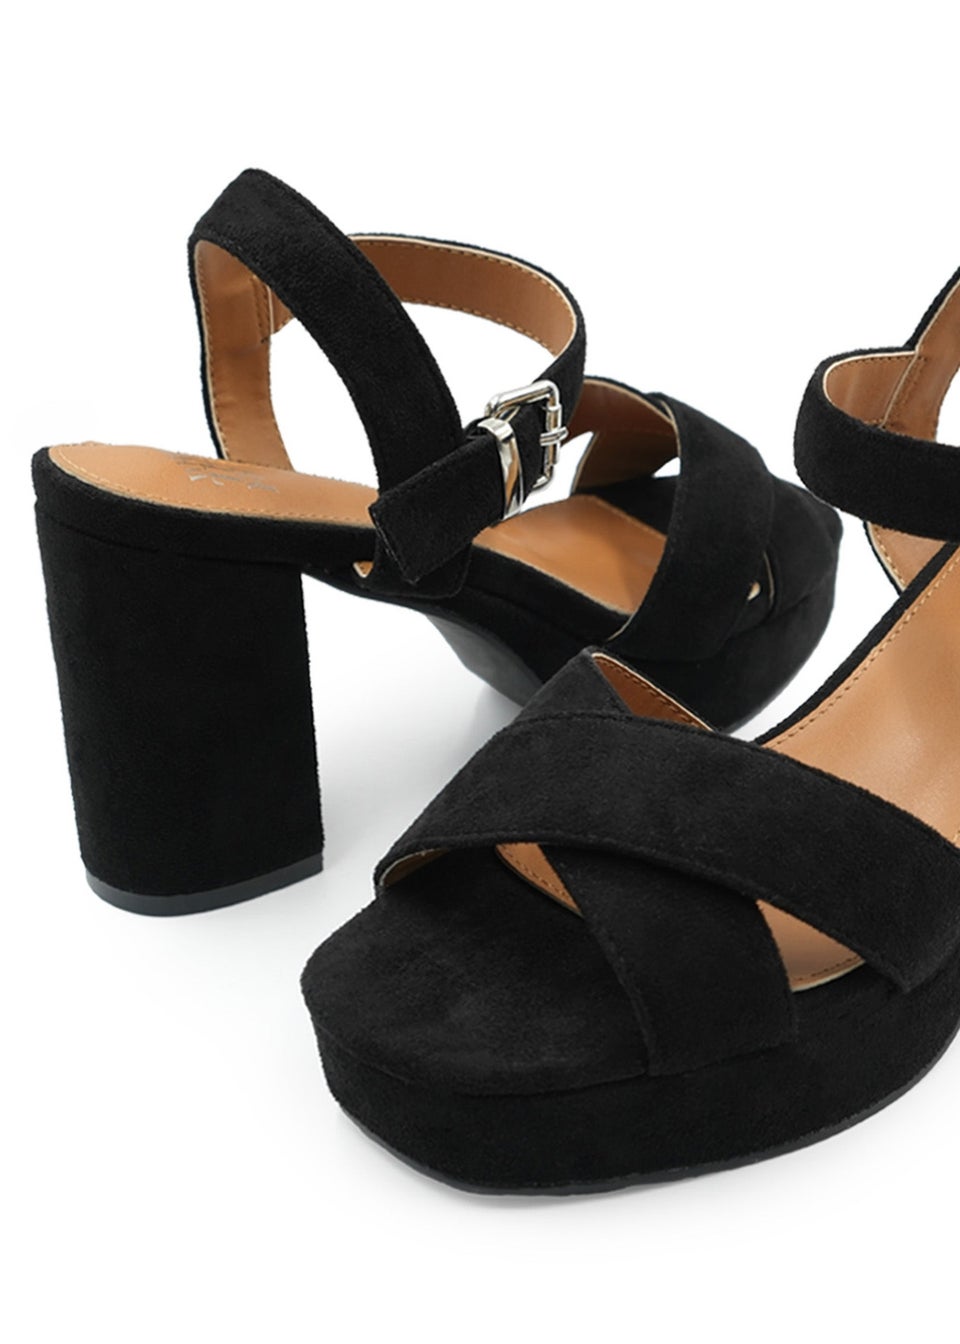 Where's That From Black Marcia Wide Fit Suede Platform Heels